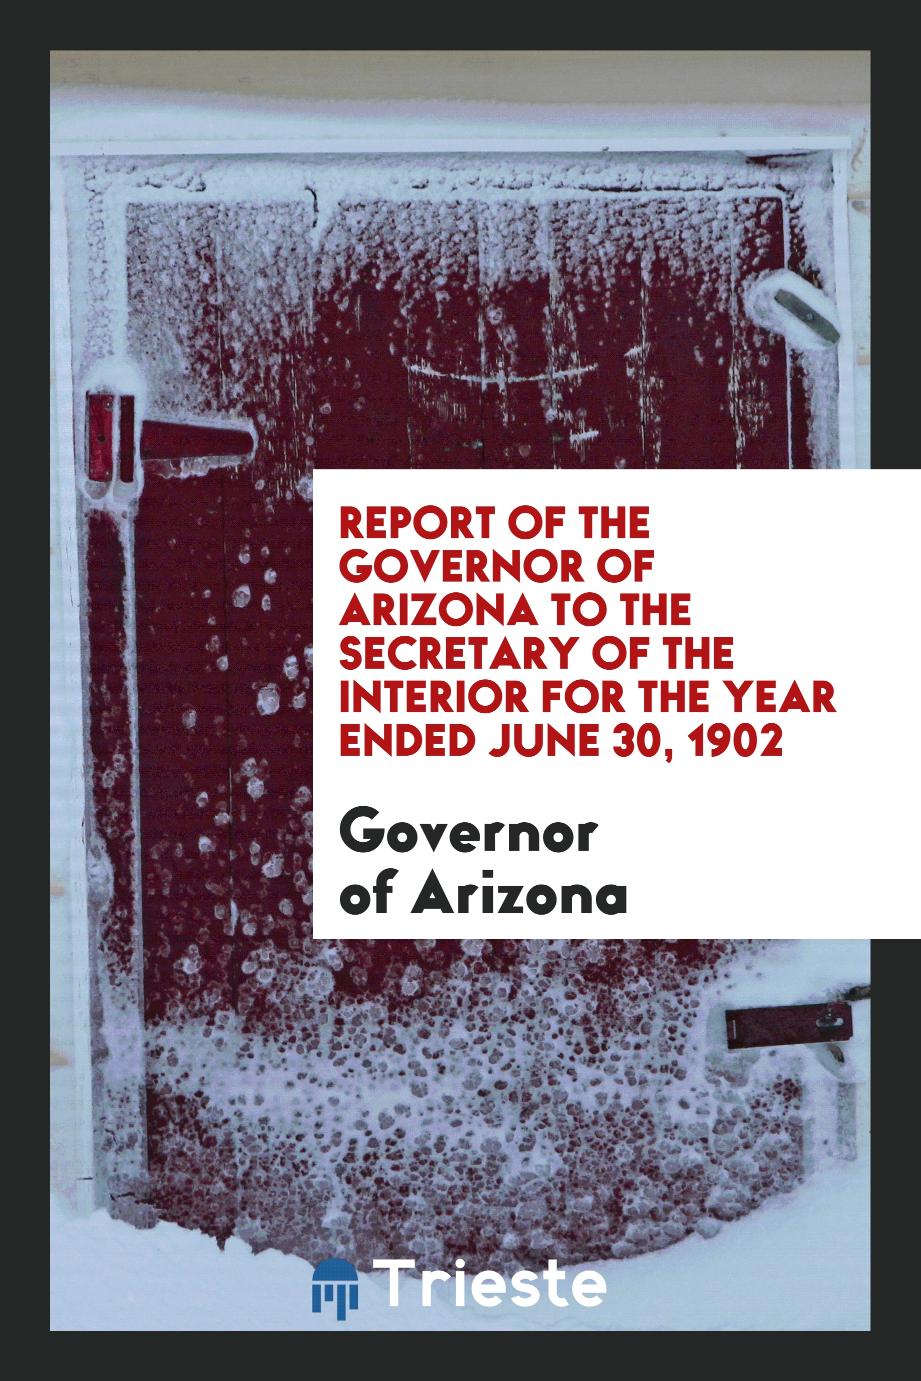 Report of the Governor of Arizona to the Secretary of the Interior for the Year Ended June 30, 1902